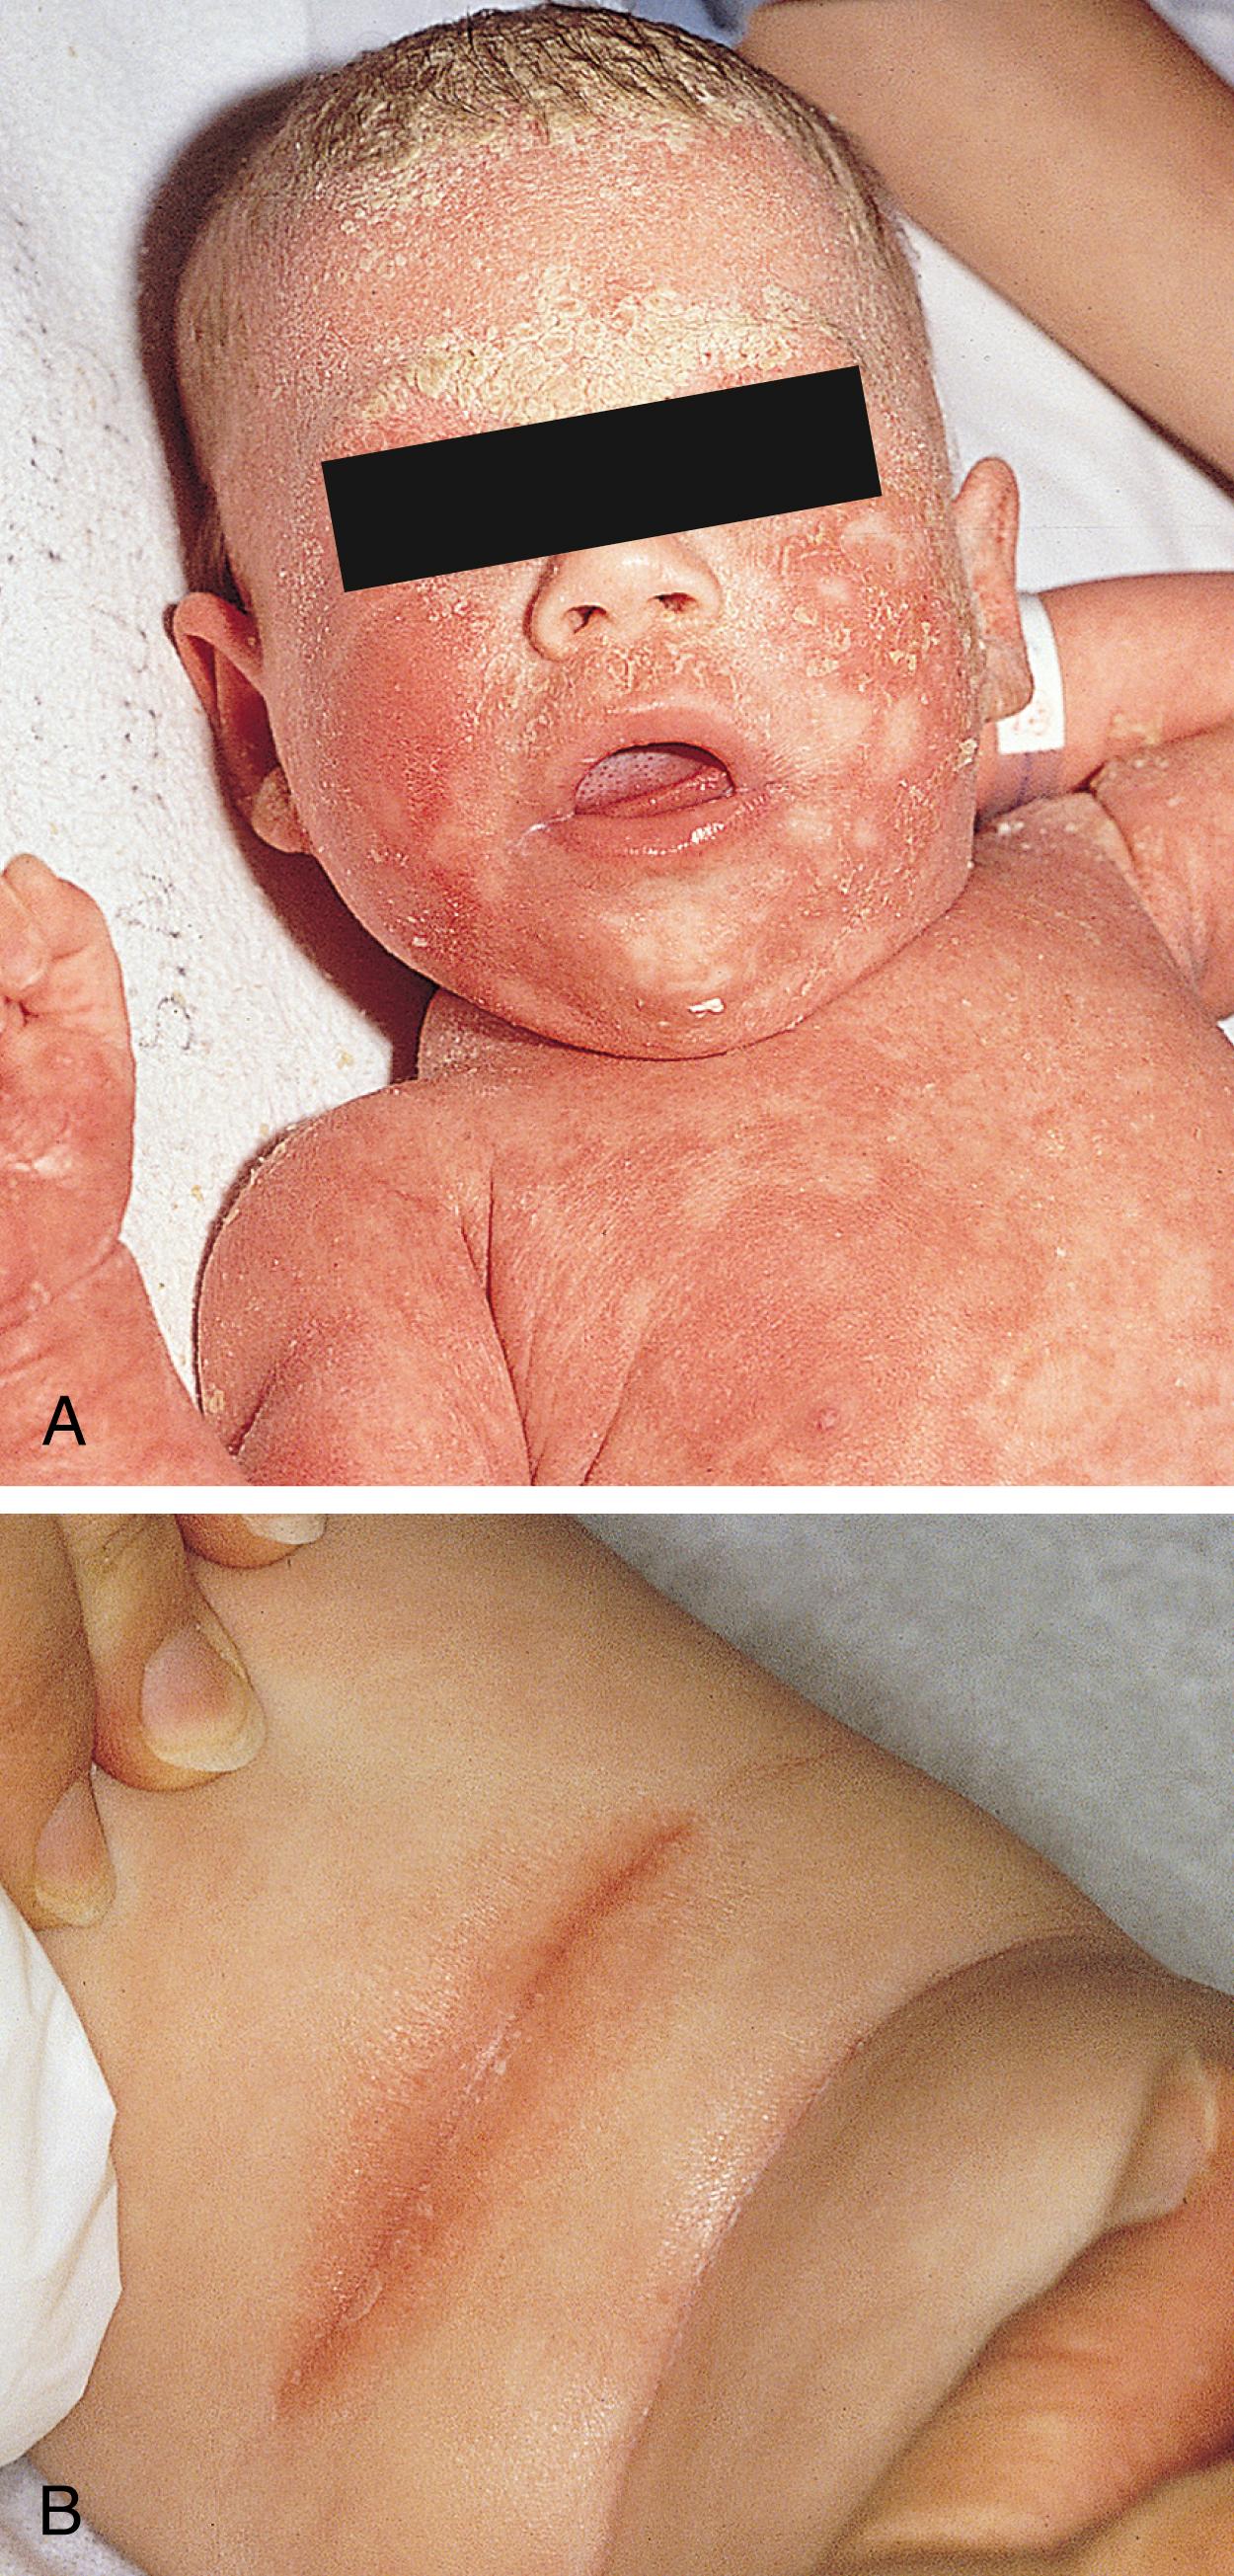 Fig. 60.7, A, Seborrheic dermatitis may occasionally be widespread. B, The body folds are often involved in seborrheic dermatitis.